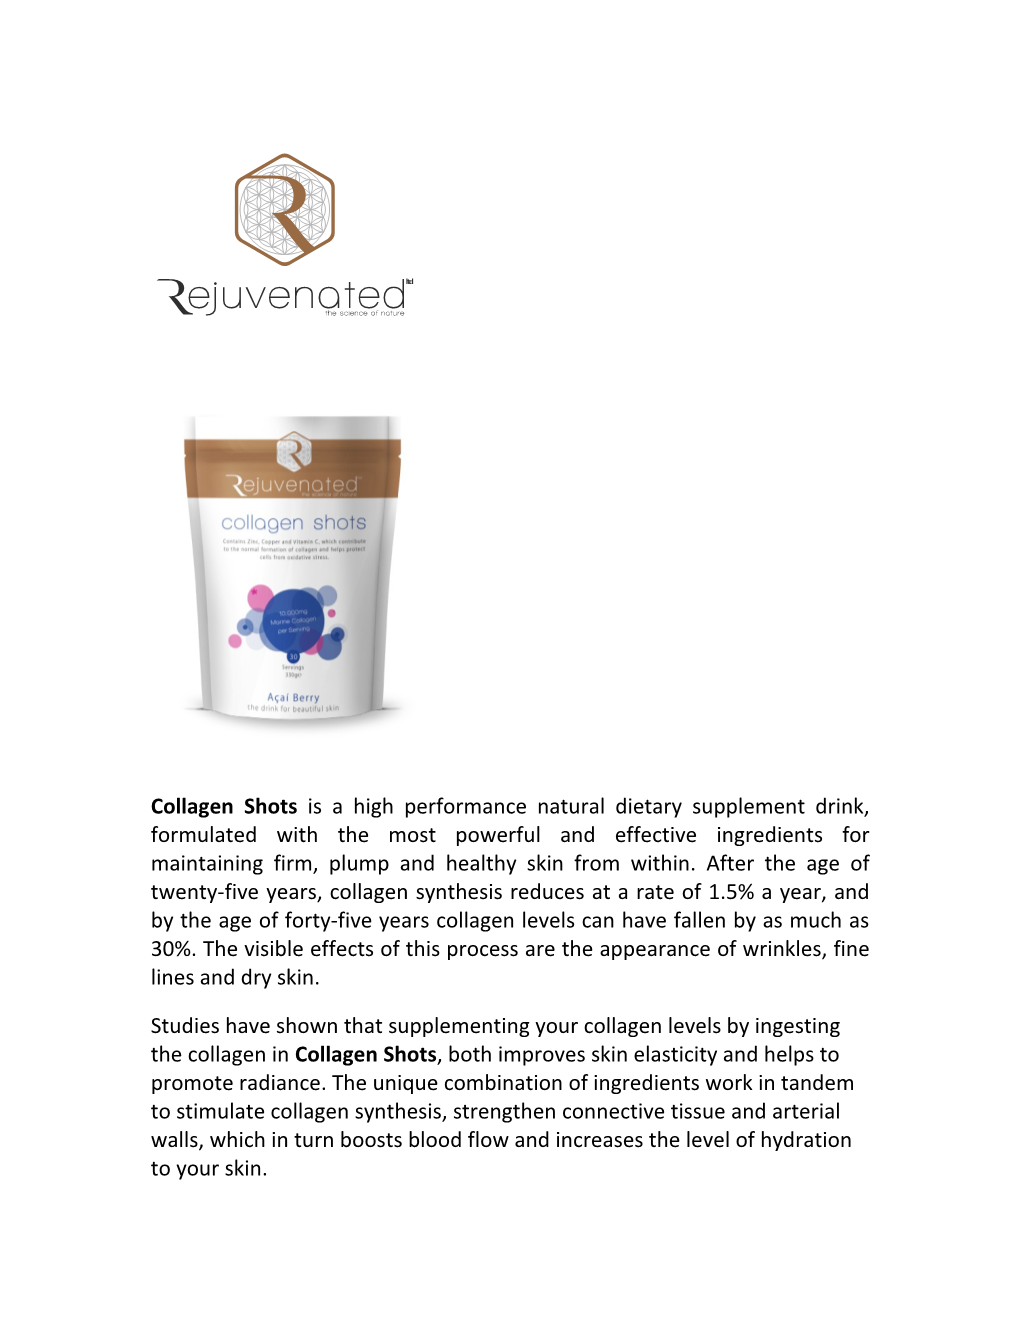 Collagen Shots Is a High Performance Natural Dietary Supplement Drink, Formulated With